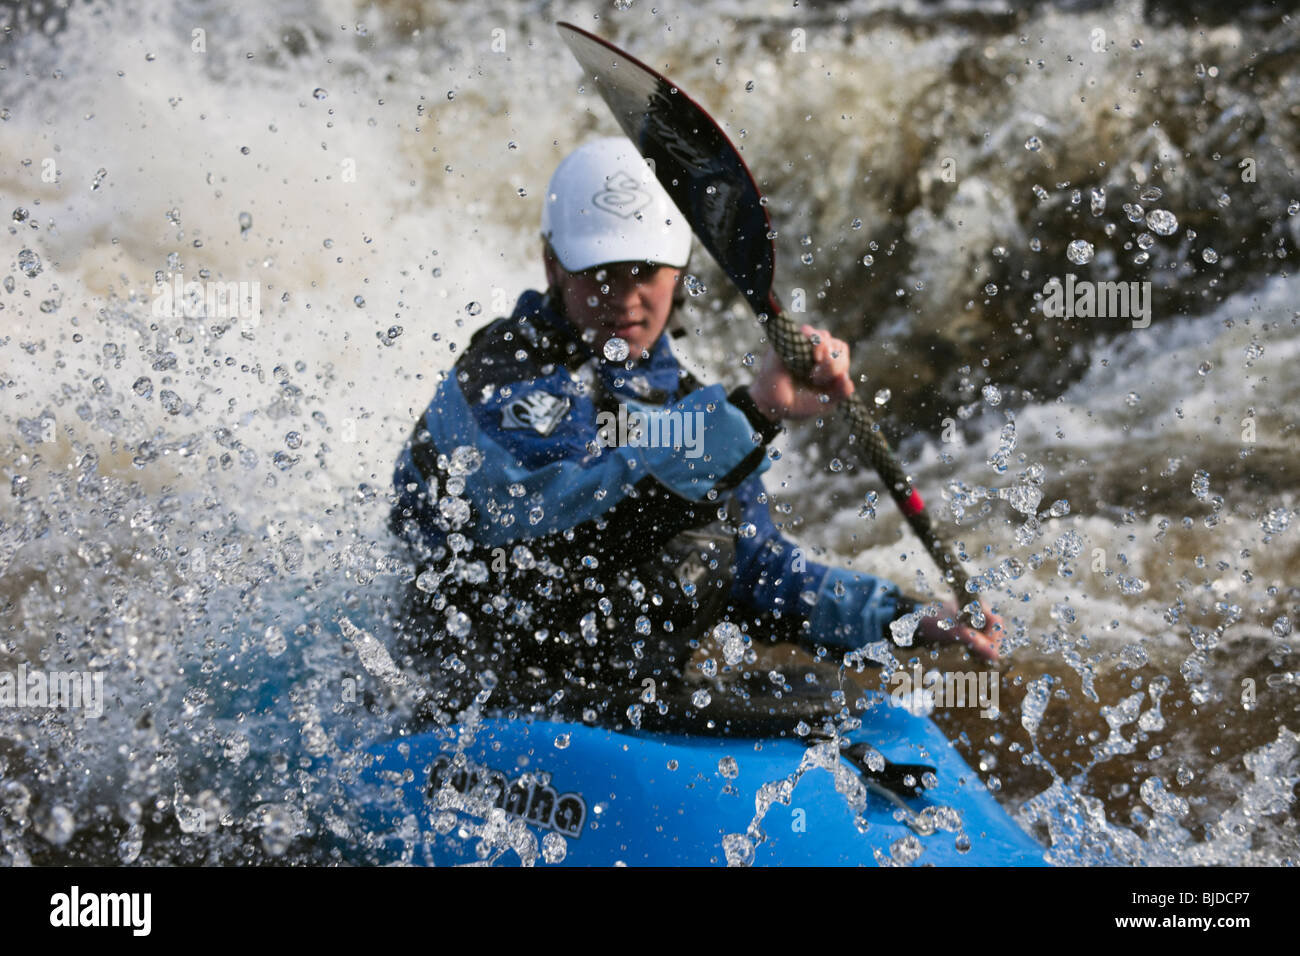 Kayaker kayaking in white water on Tryweryn River at National Whitewater Centre, Frongoch, Gwynedd, North Wales, UK, Britain. Stock Photo